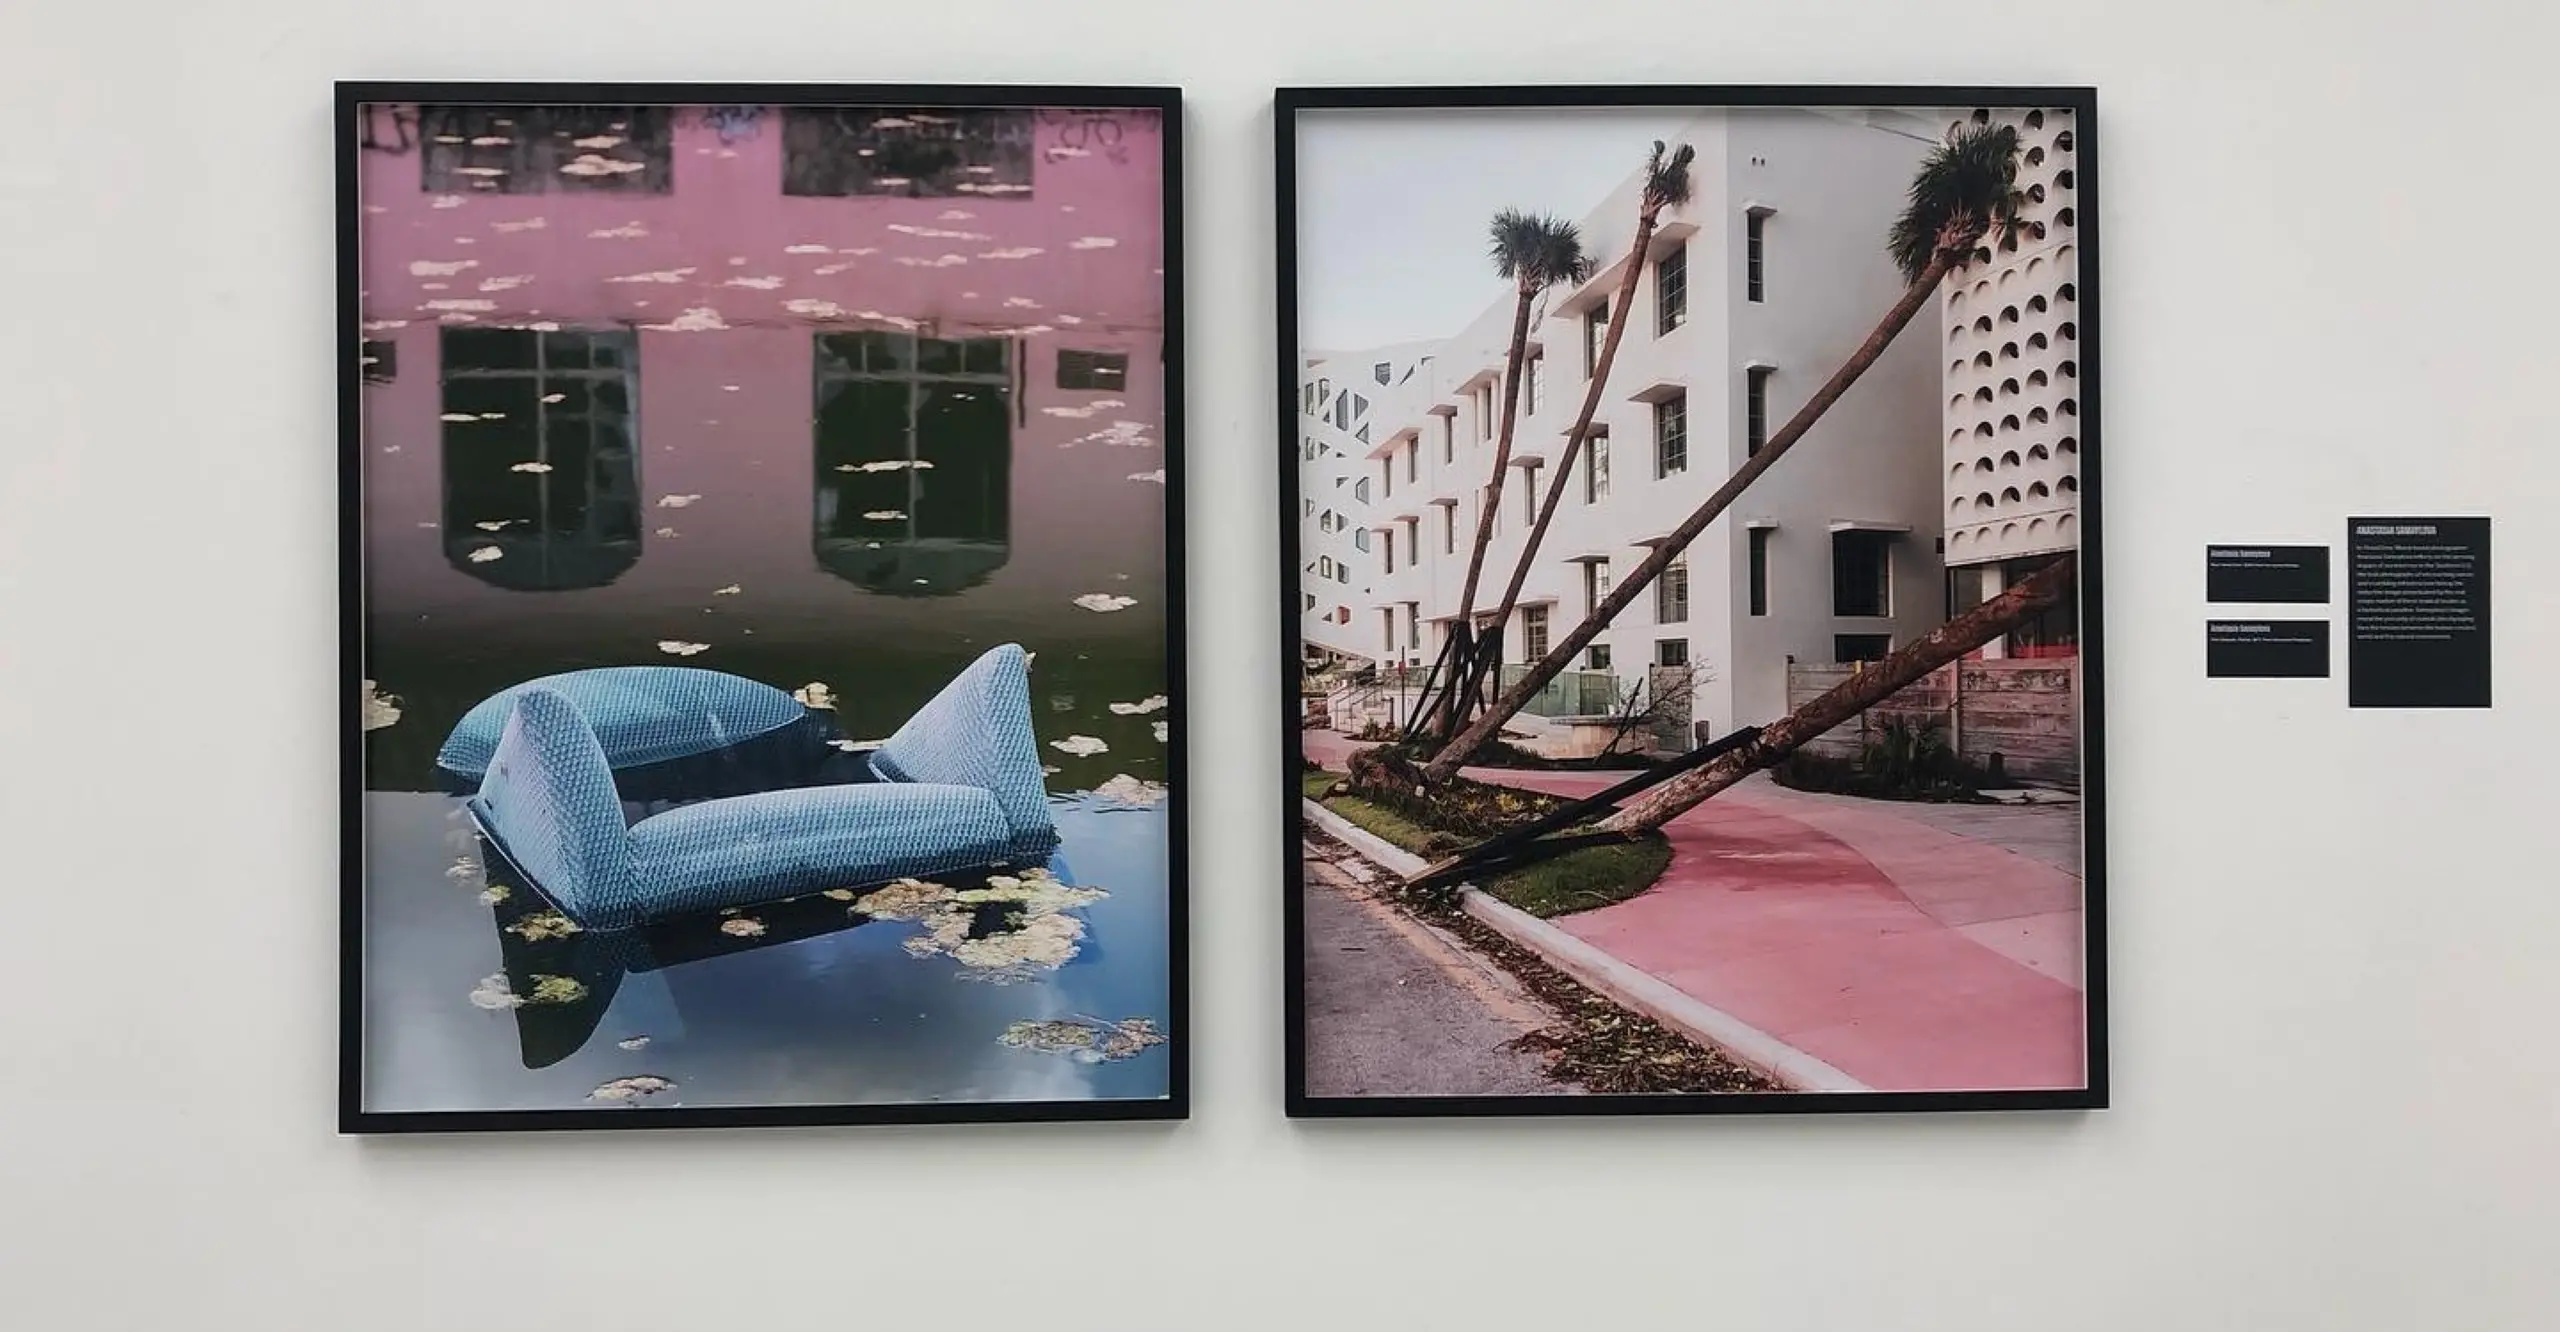 Two images, the first of blue furniture submerged in flood water, the second of palm trees and a pink street 